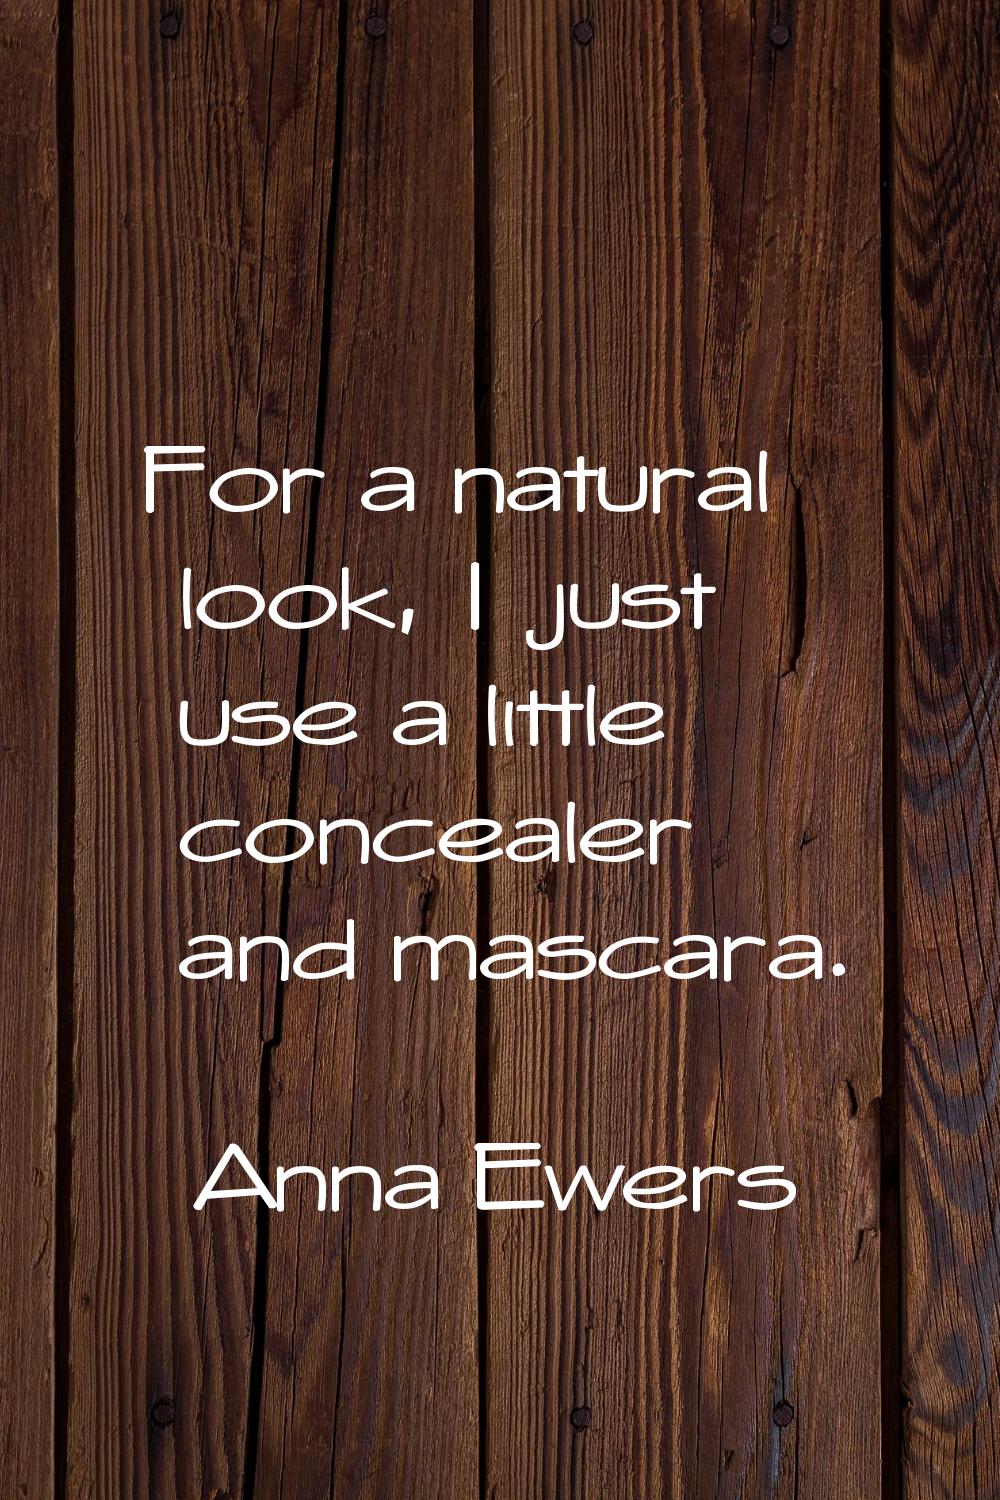 For a natural look, I just use a little concealer and mascara.